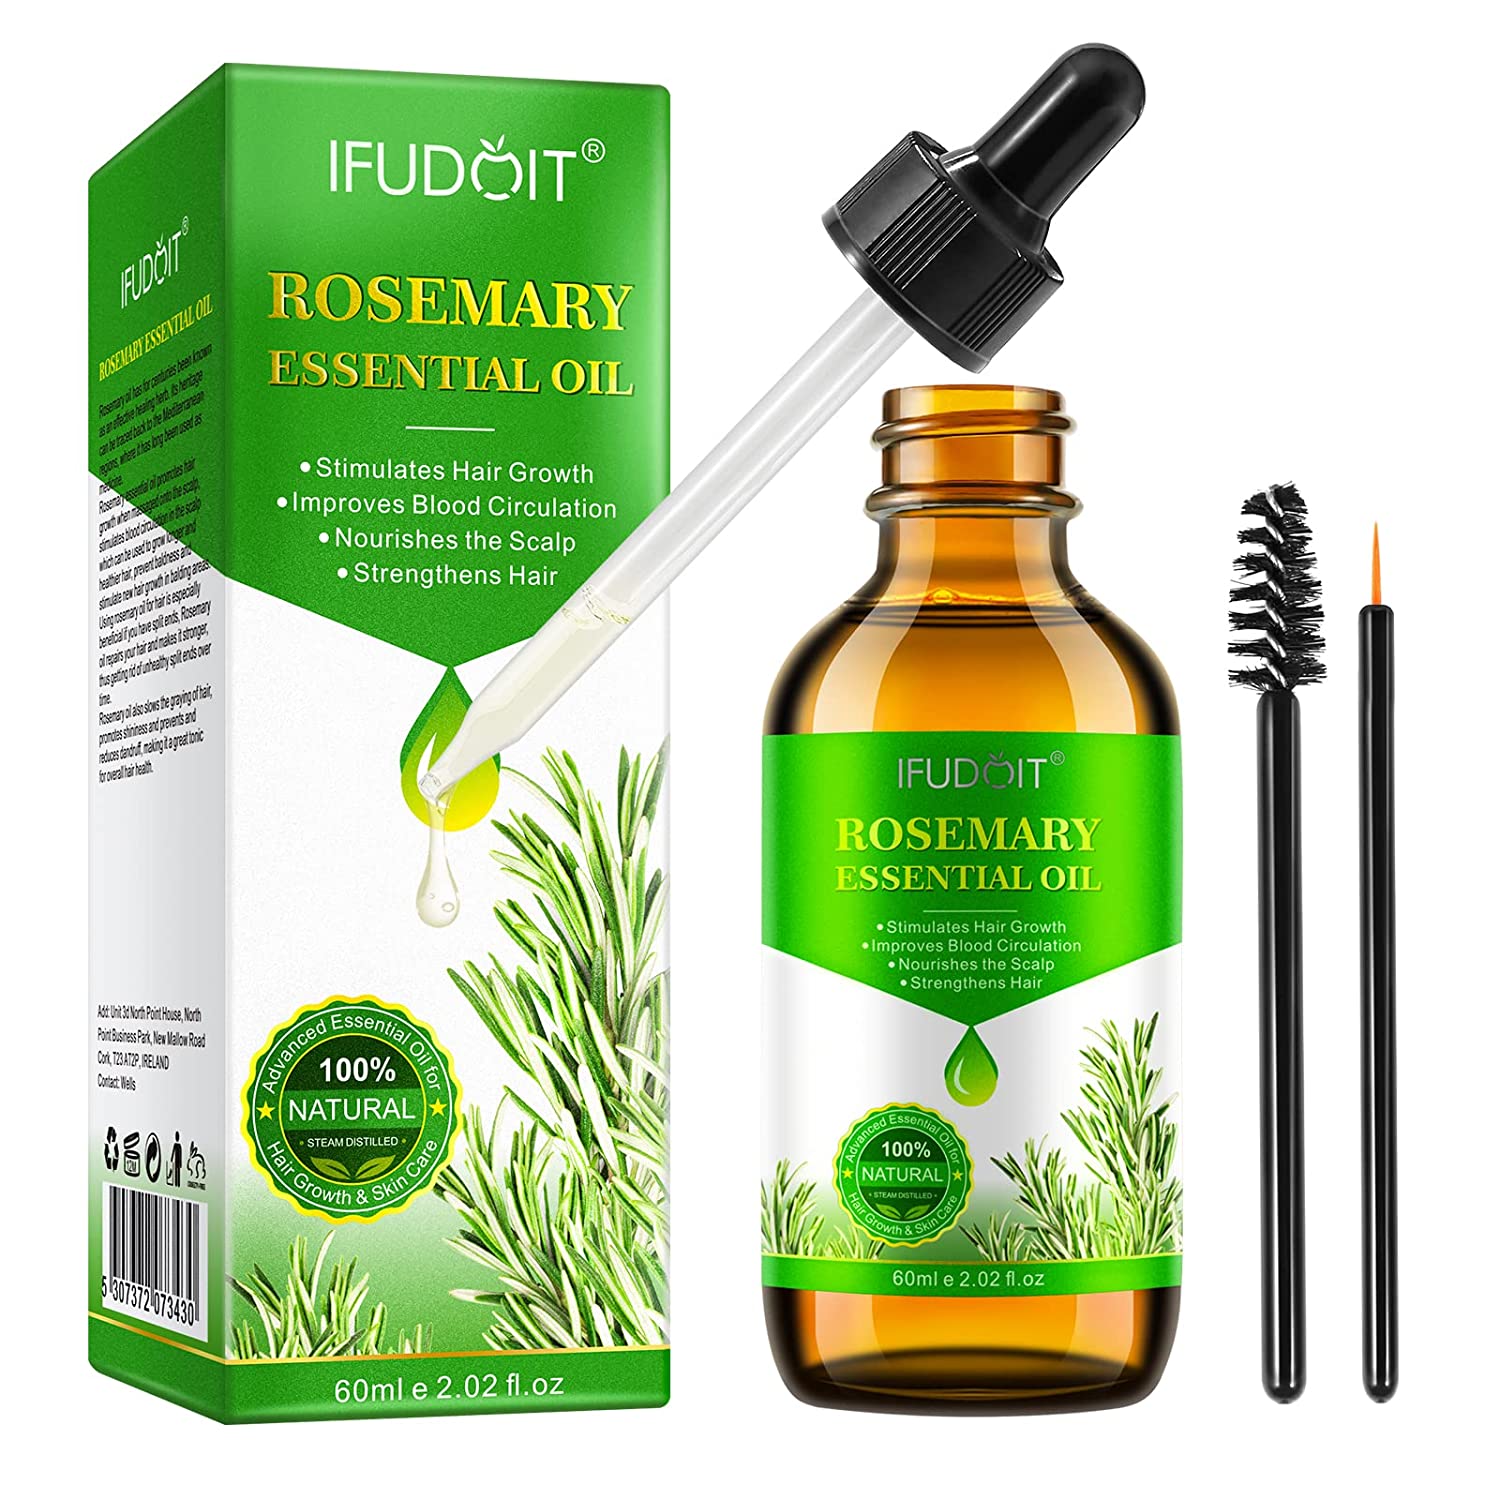 IFUDOIT Rosemary Oil for Hair Growth, Rosemary Essential Oil for Eyebrow and Eyelash Growth, Stimulates Hair Growth, Hair Loss Treatment Oil for Women and Men